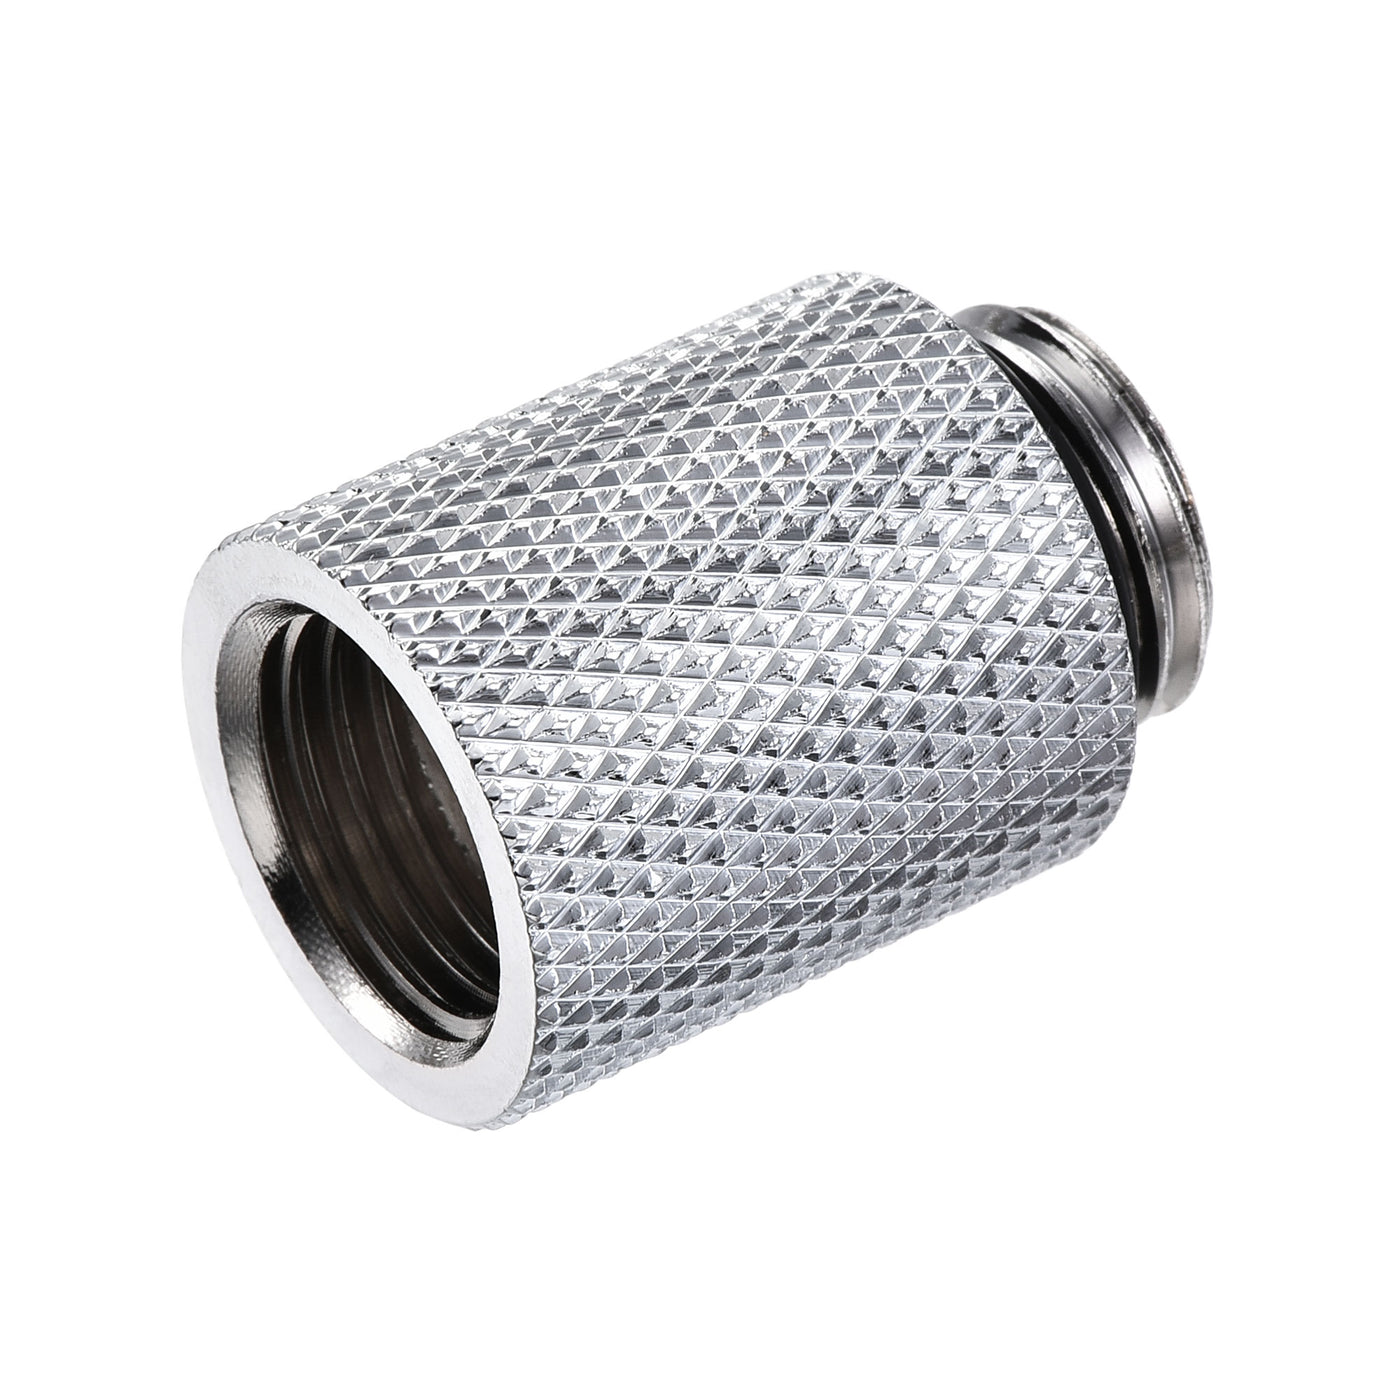 uxcell Uxcell Male to Female Extender Fitting G1/4 x 20mm for Water Cooling System Silver